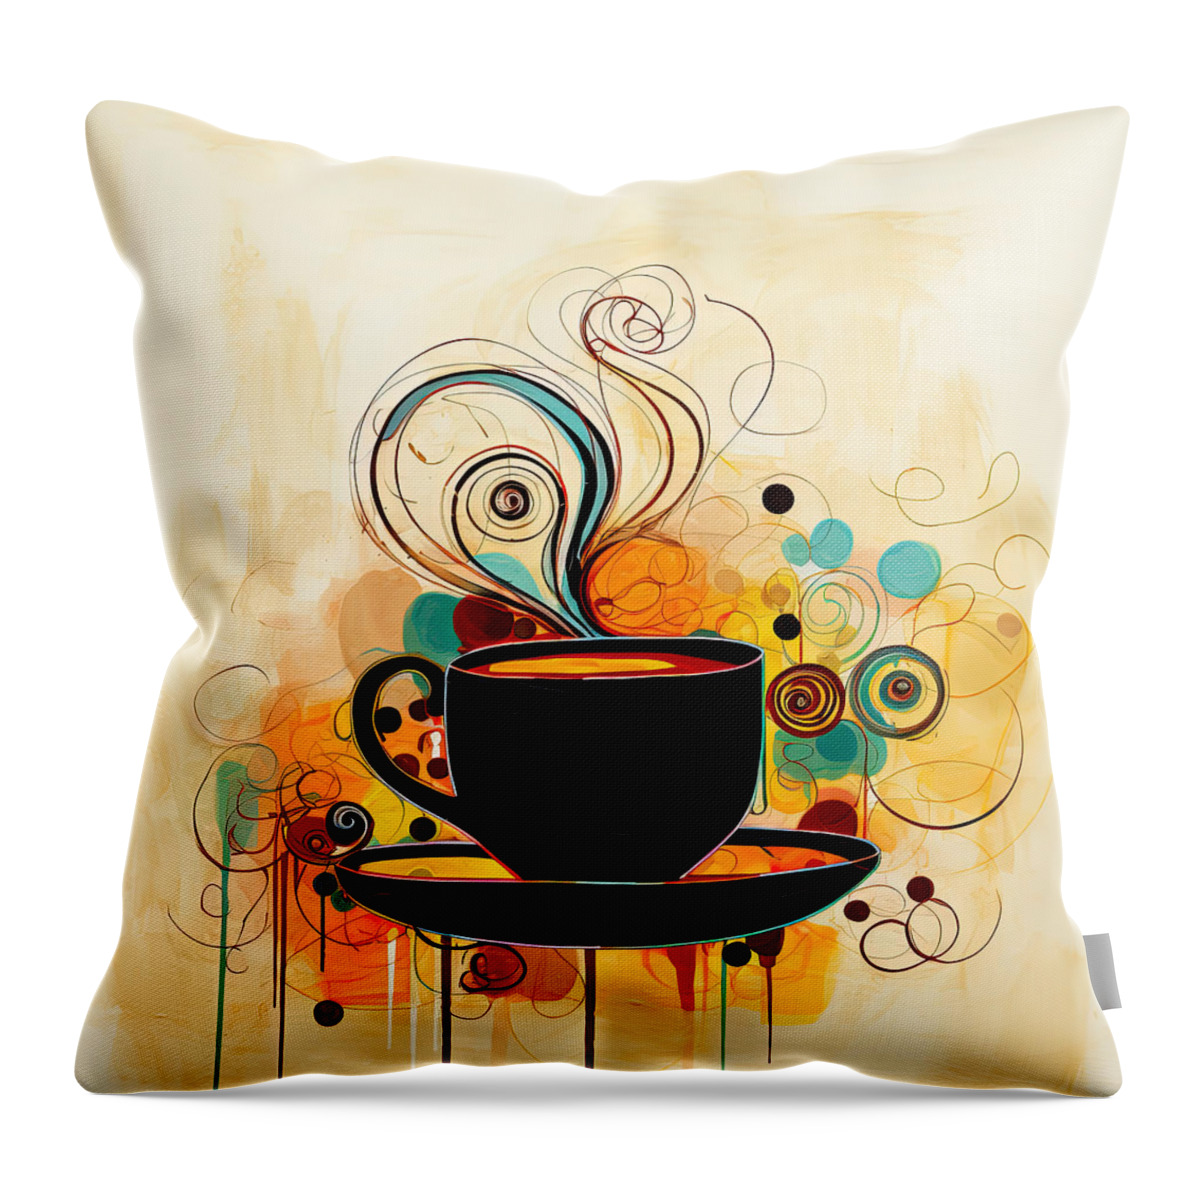  Throw Pillow featuring the digital art Espresso Passion by Lourry Legarde